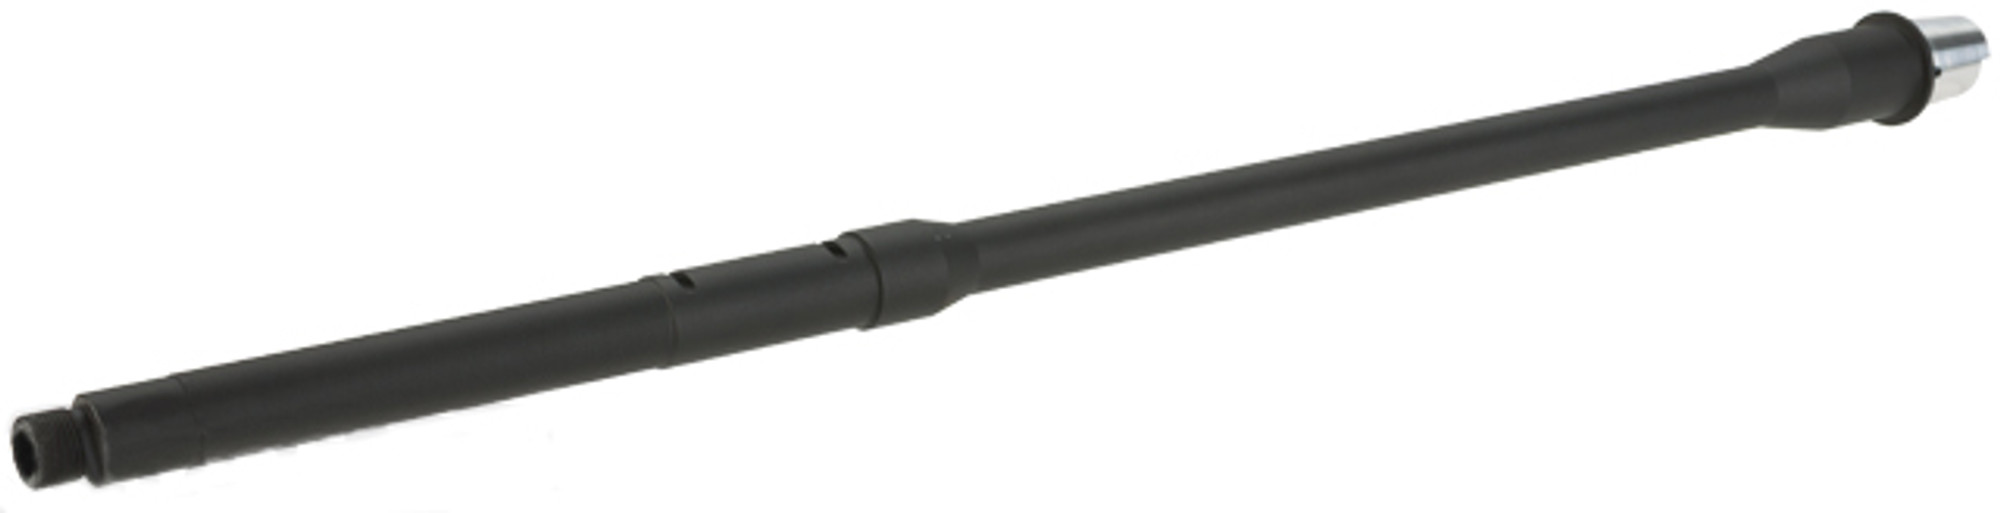 G&P Tapered 20" M16A2 CNC Aluminum GP-T Outer Barrel for G&P GP-T AEG Receivers